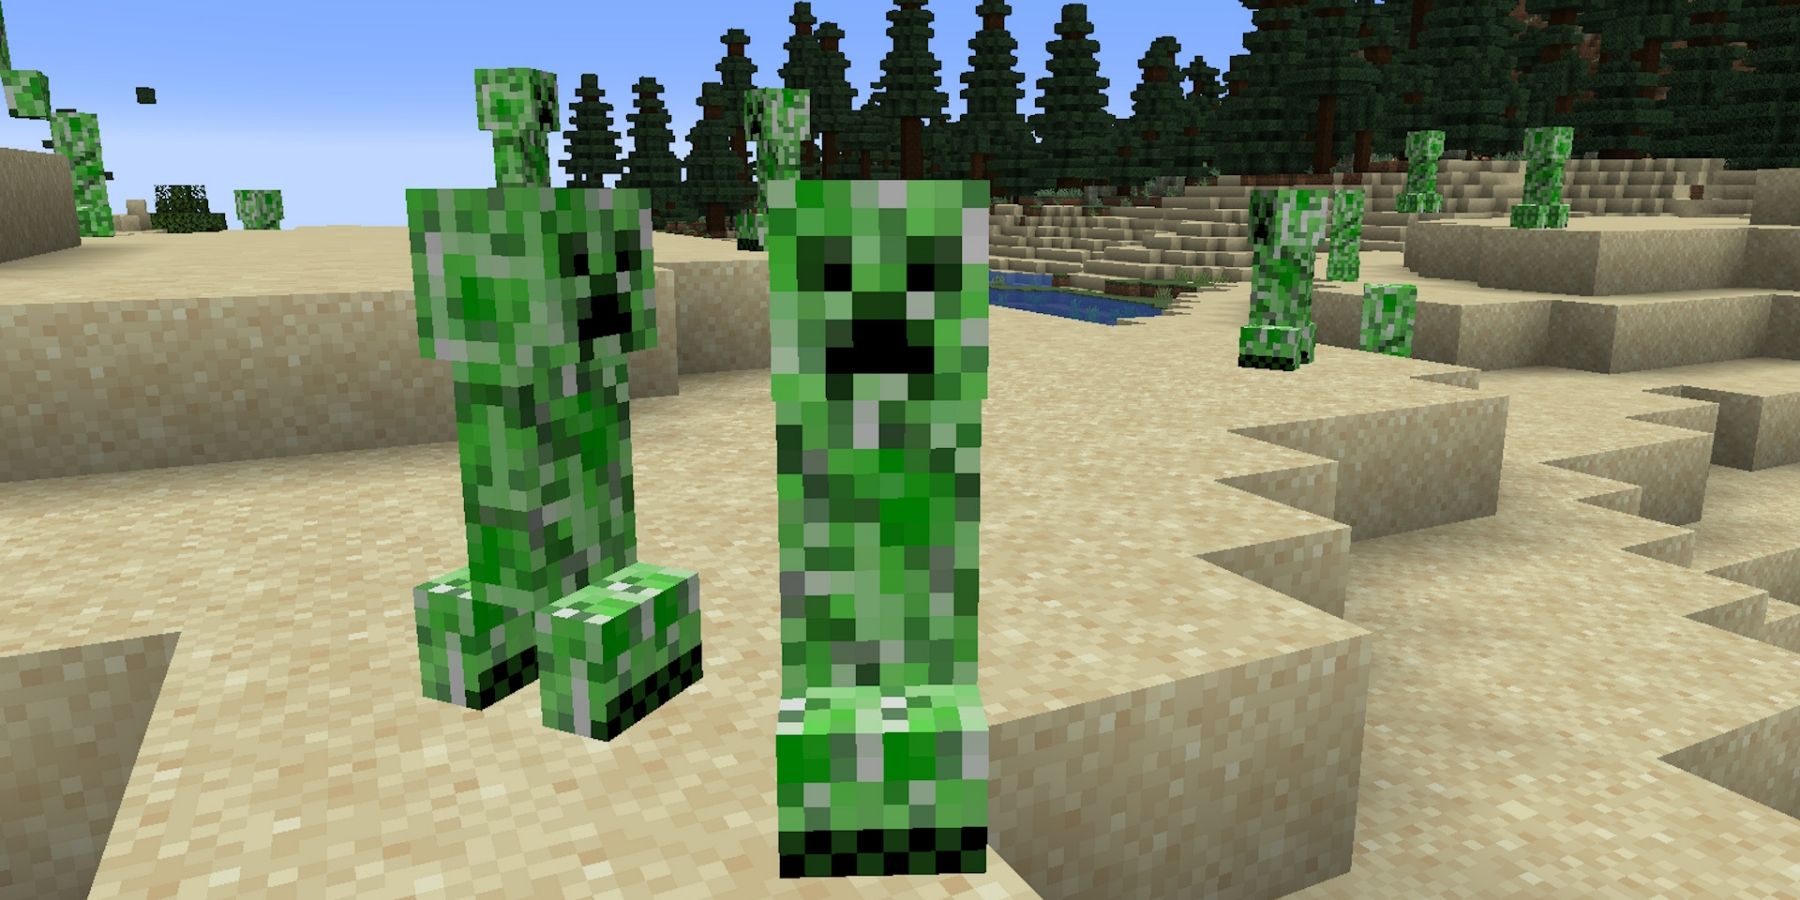 Minecraft Player’s Attempt to Get Rid of Creeper Backfires in Hilarious Way